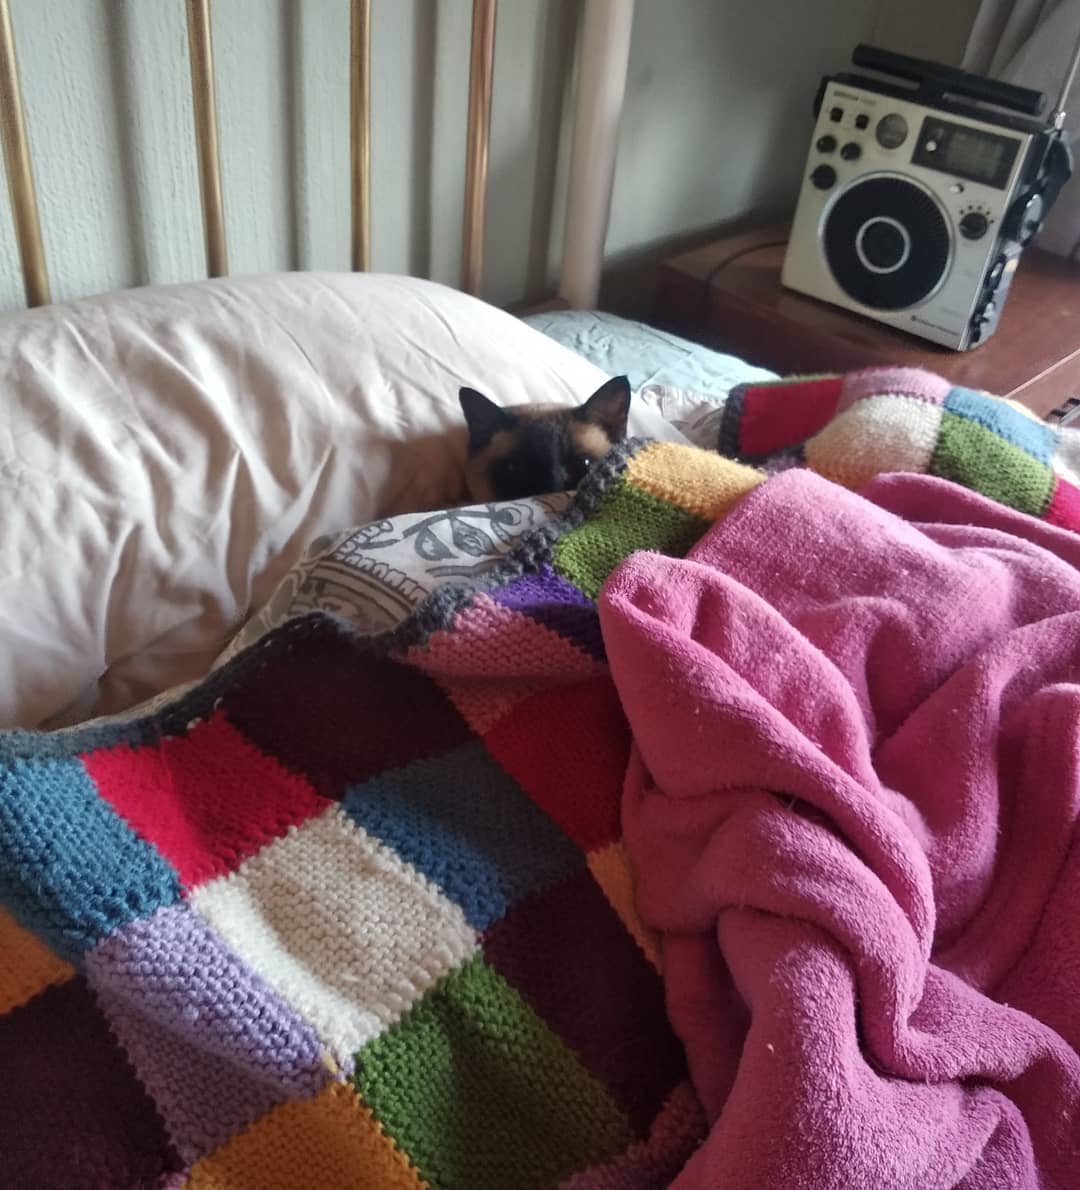 Siamese Cat snuggled up in blanket on the bed